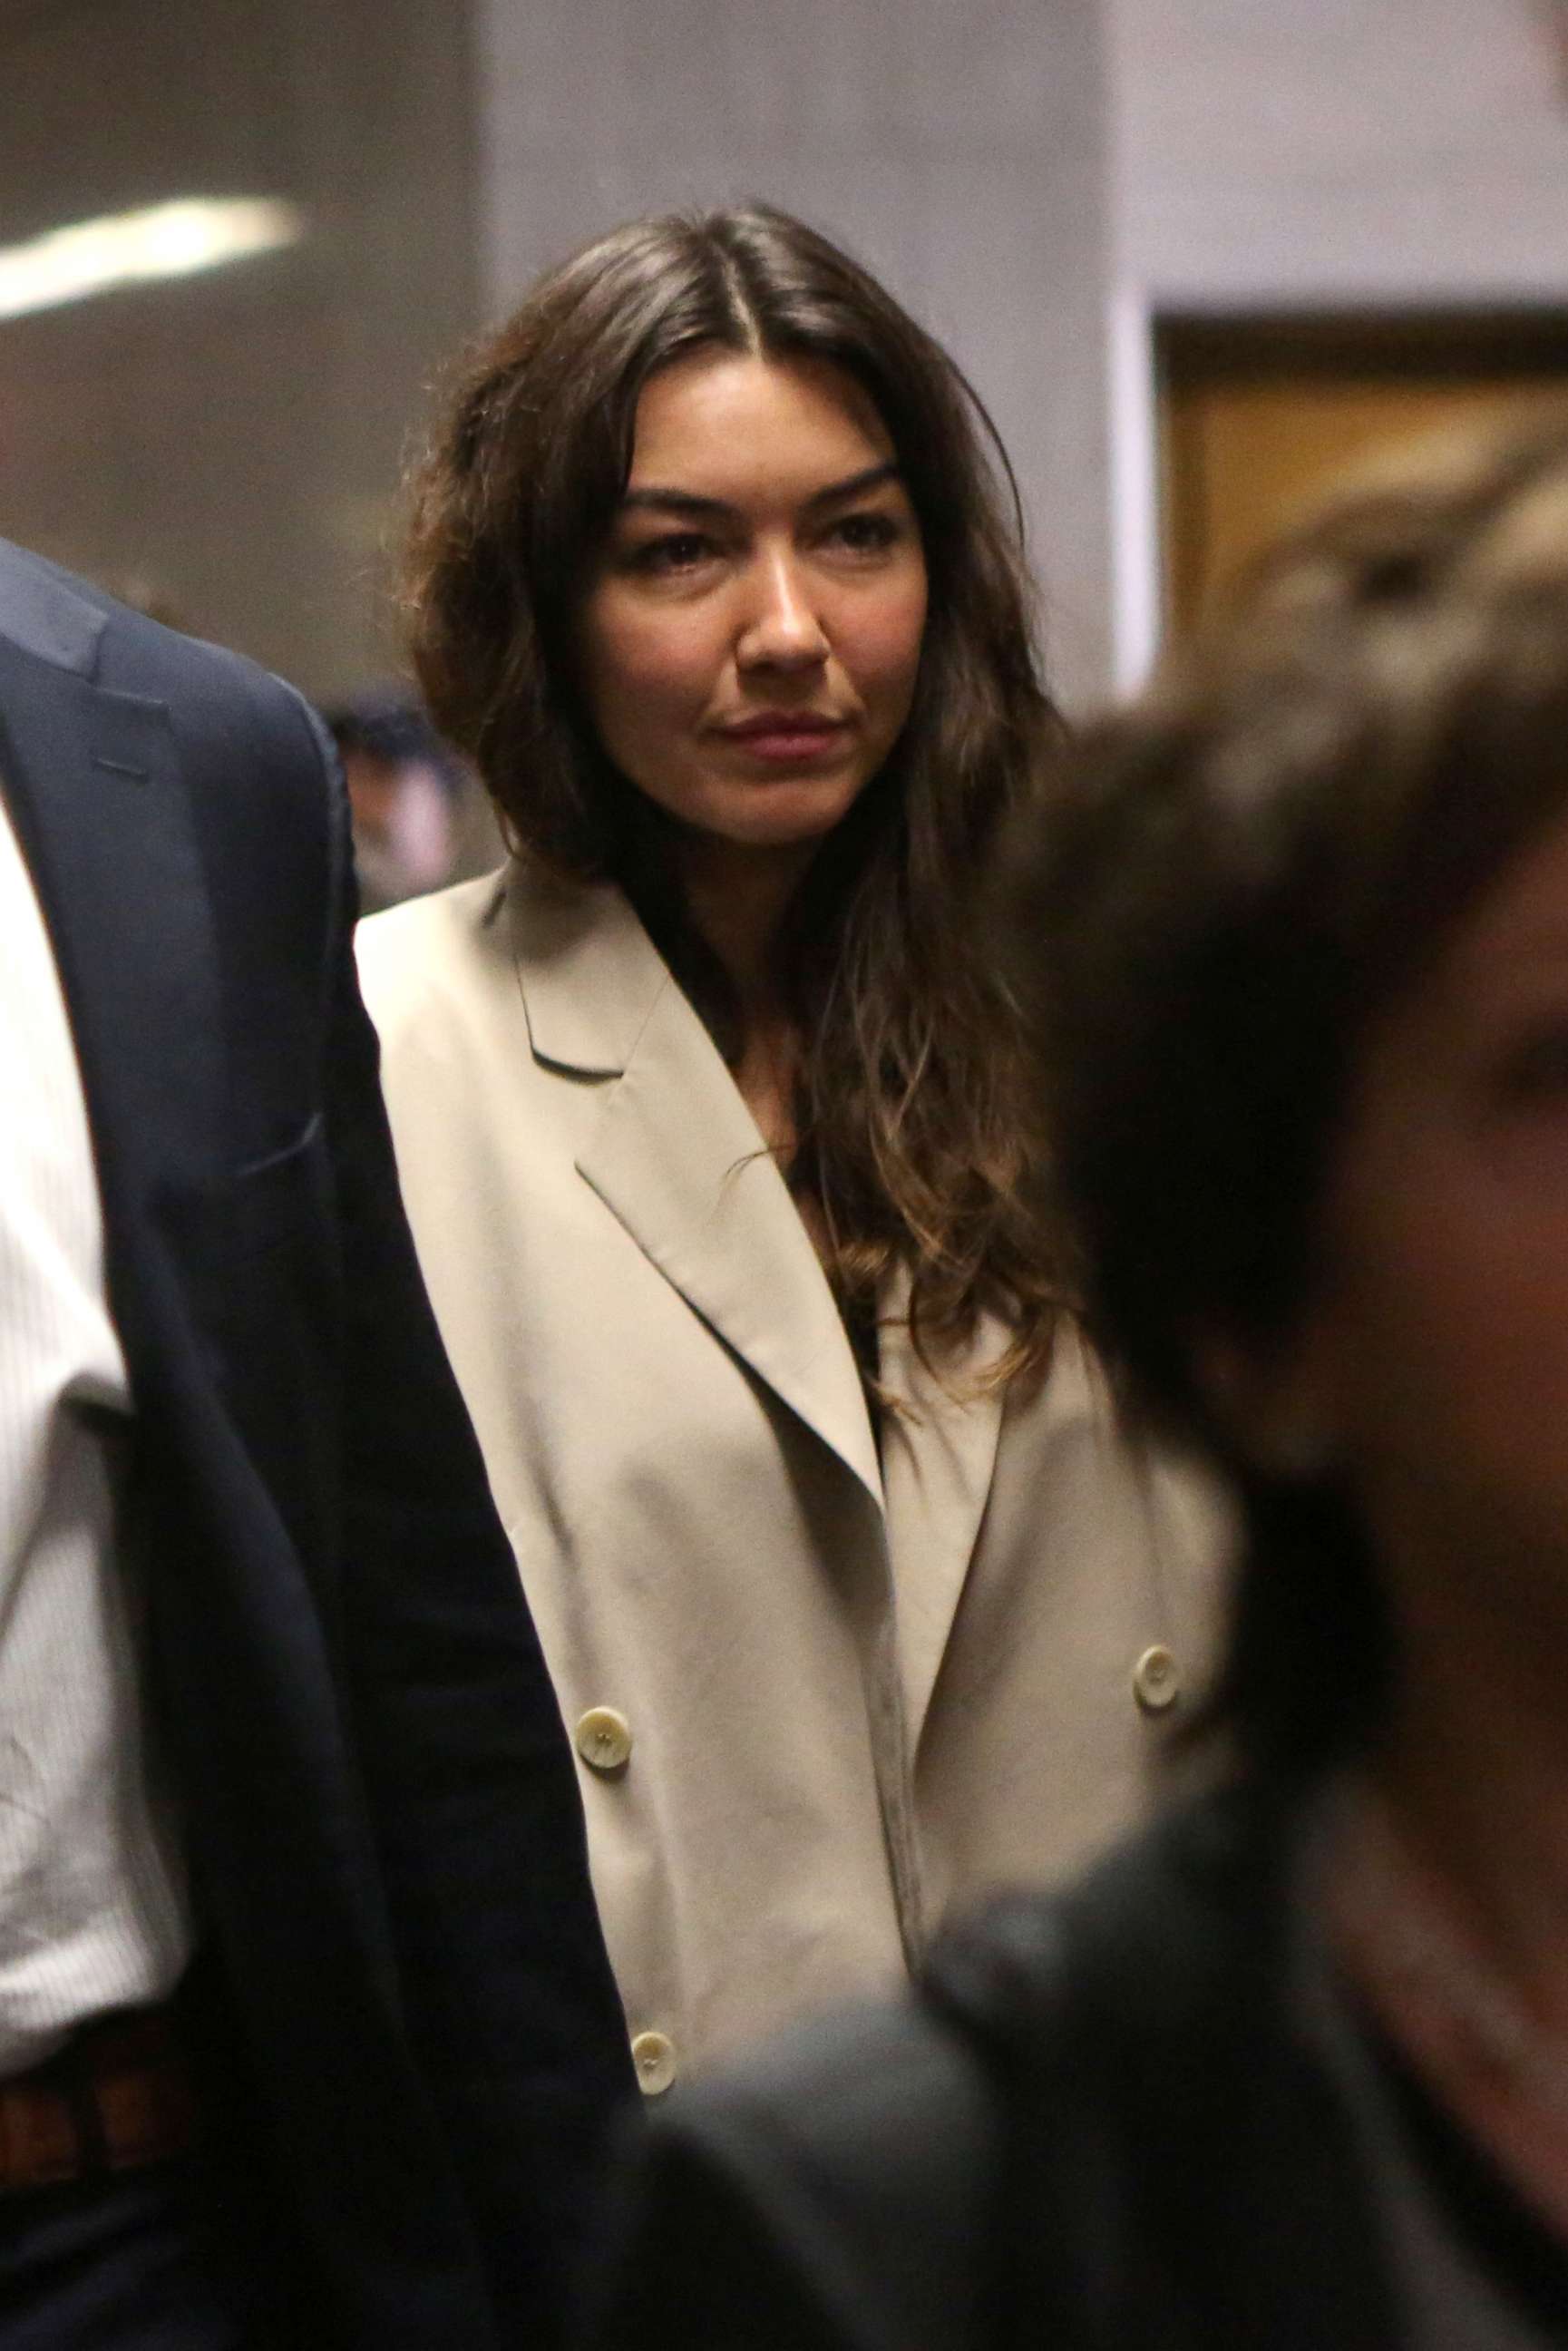 PHOTO: Mimi Haleyi, former production assistant, arrives to testify against Harvey Weinstein at the Criminal Court during Weinsteinâs sexual assault trial in the Manhattan borough of New York City, Jan. 27, 2020.